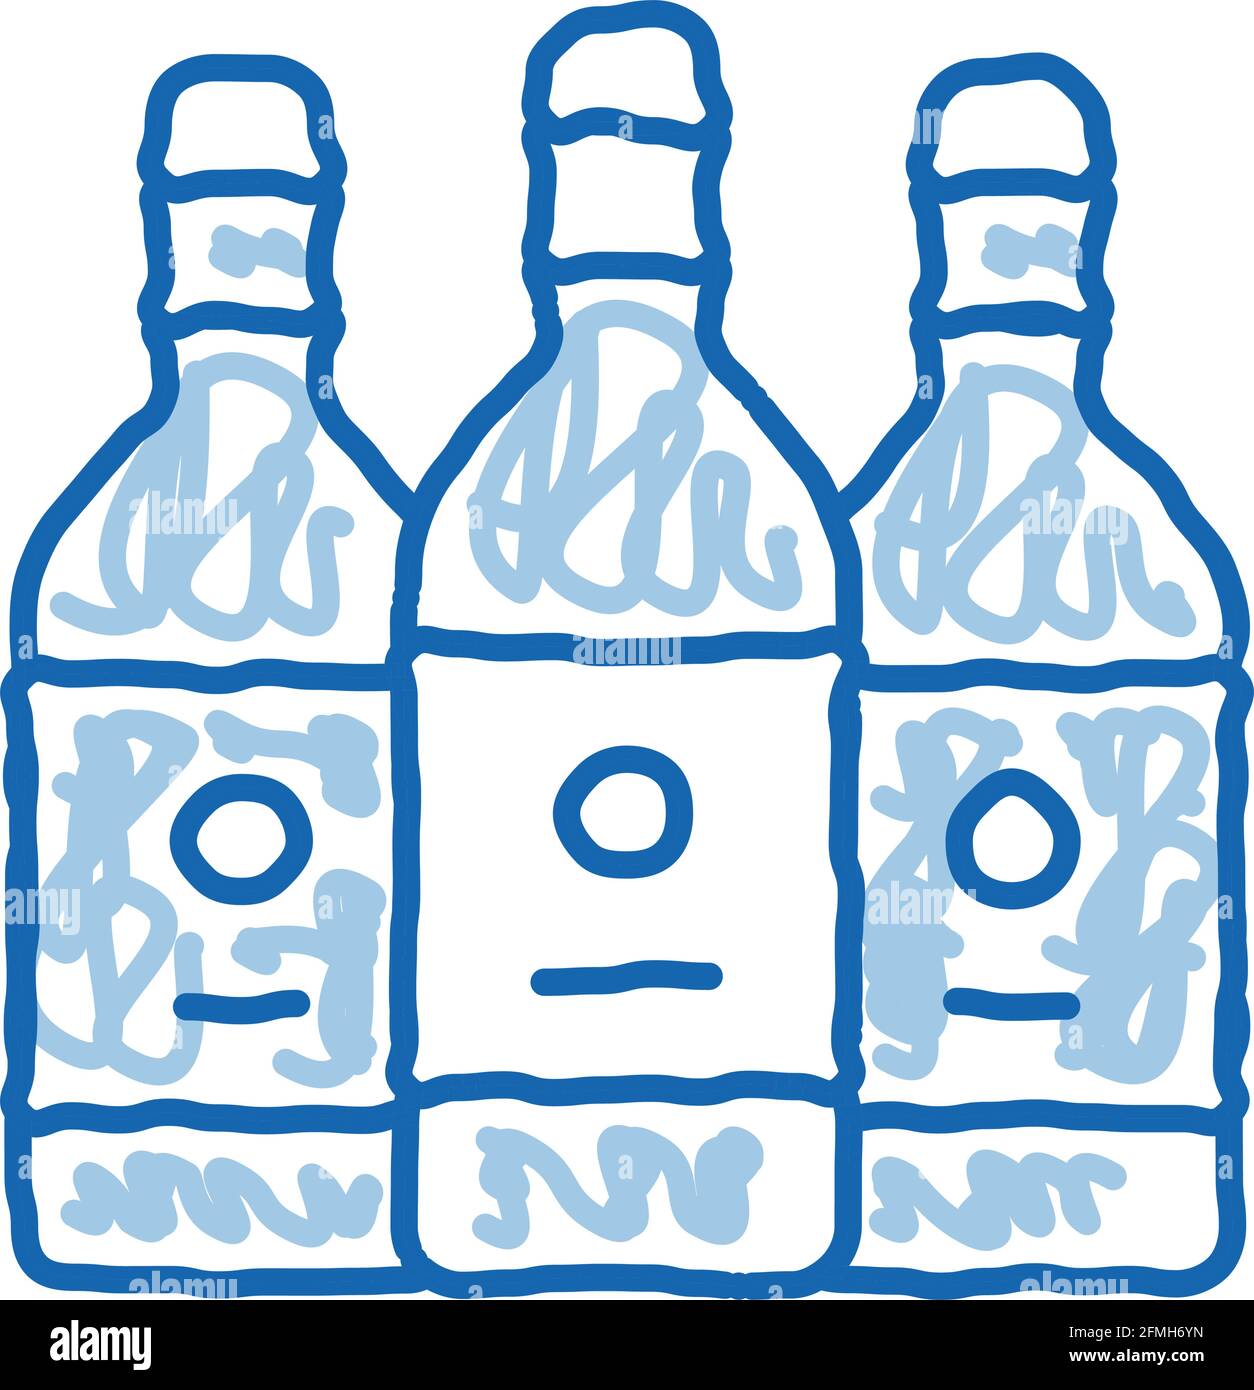 Drink Bottles doodle icon hand drawn illustration Stock Vector